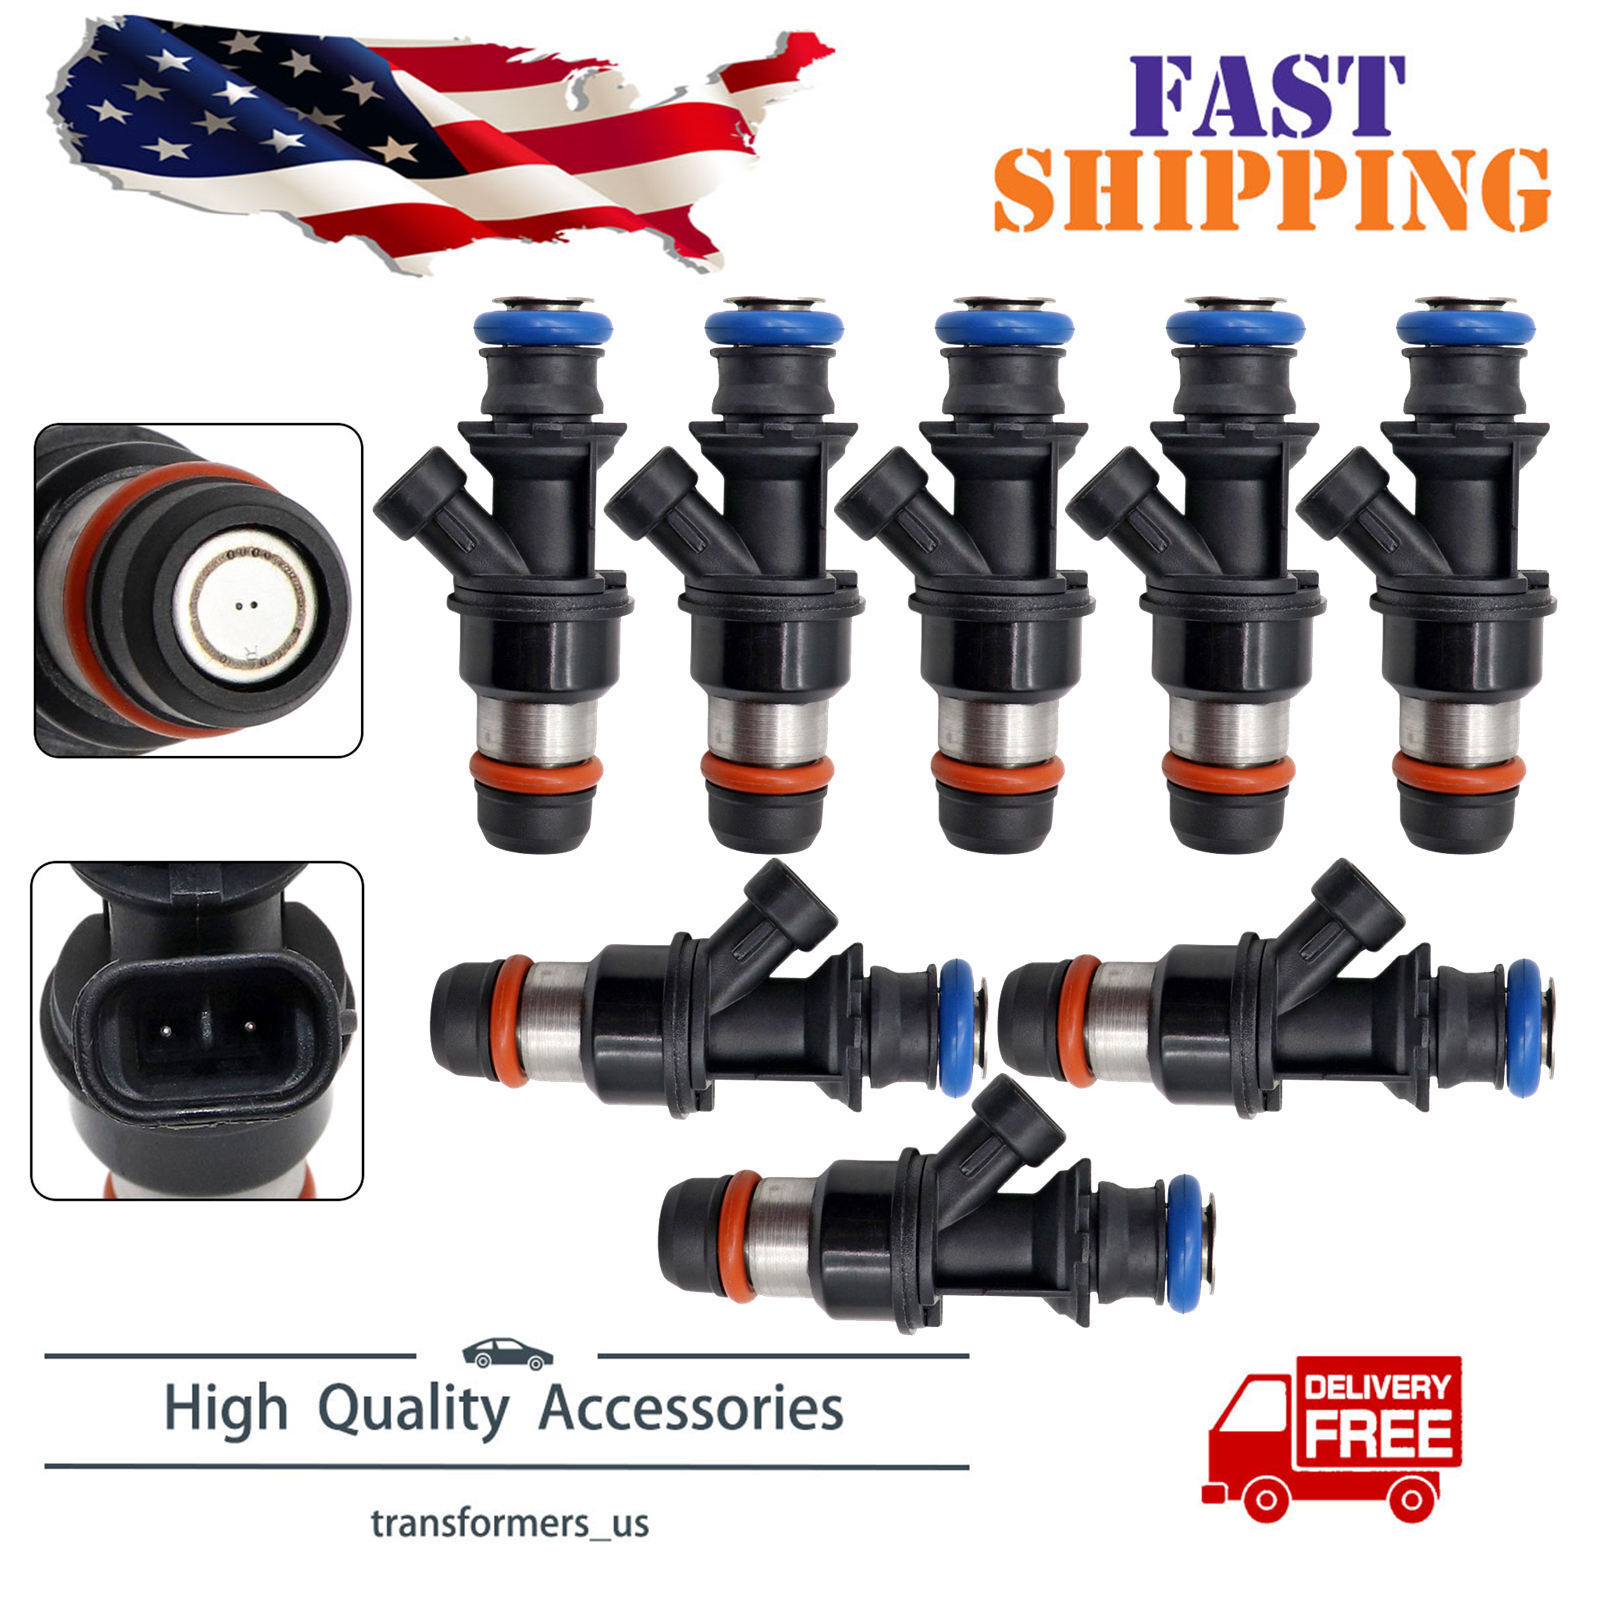 8x Fuel Injector for 2001-2007 GM Chevy GMC Truck 4.8L 5.3L 6.0L 25317628